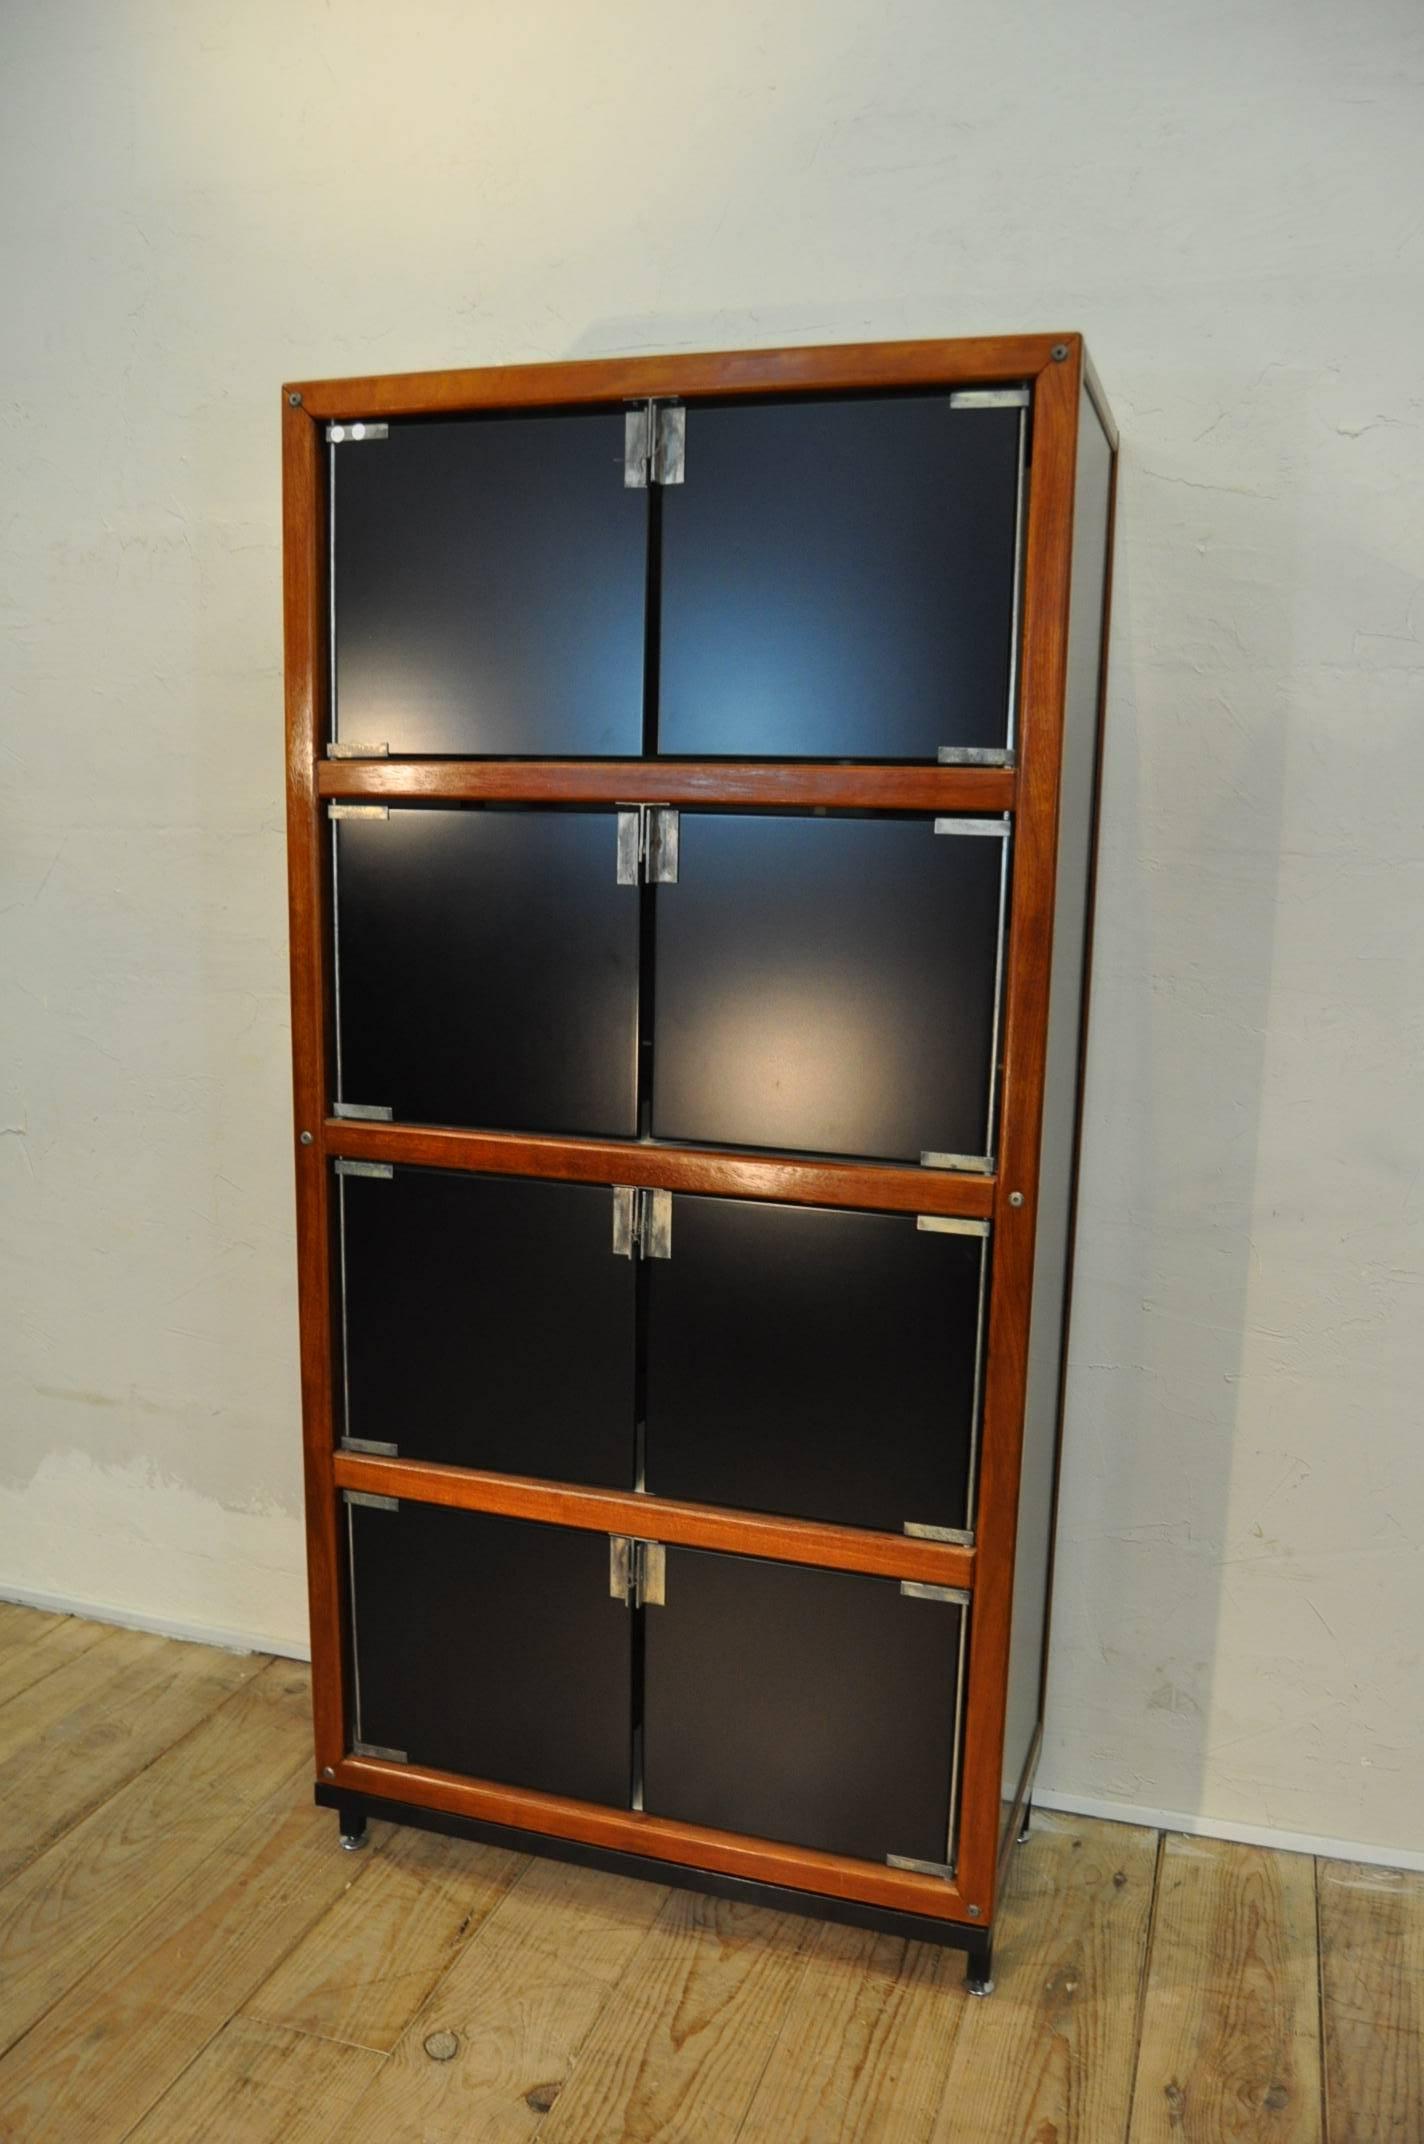 A very famous cabinet by Andre Sornay made of mahogany and lacquered isorel doors circa 1960 in very good condition.